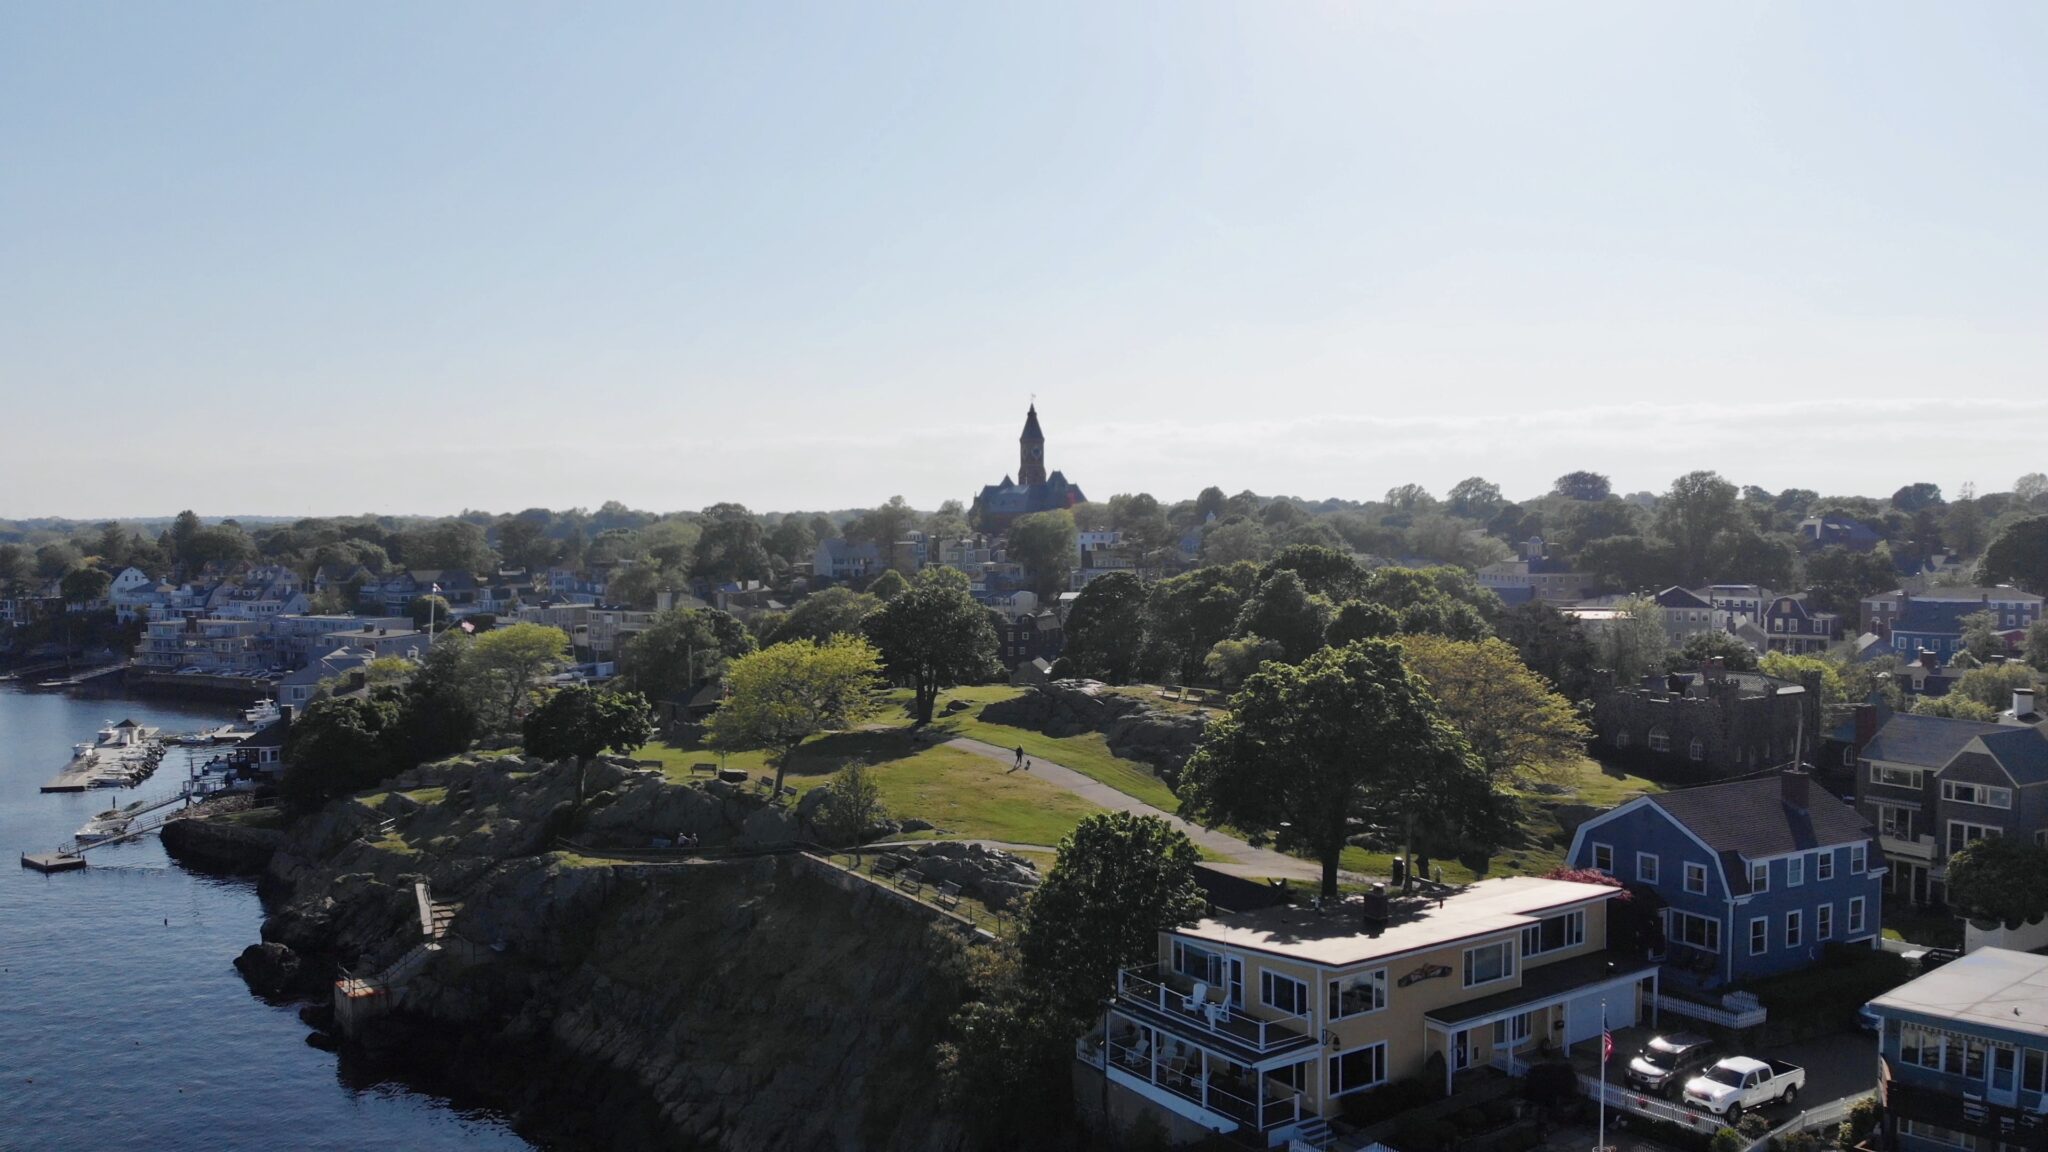 Aerial view of the Town of Marblehead showing historic buildings, a park, and the waterfront.